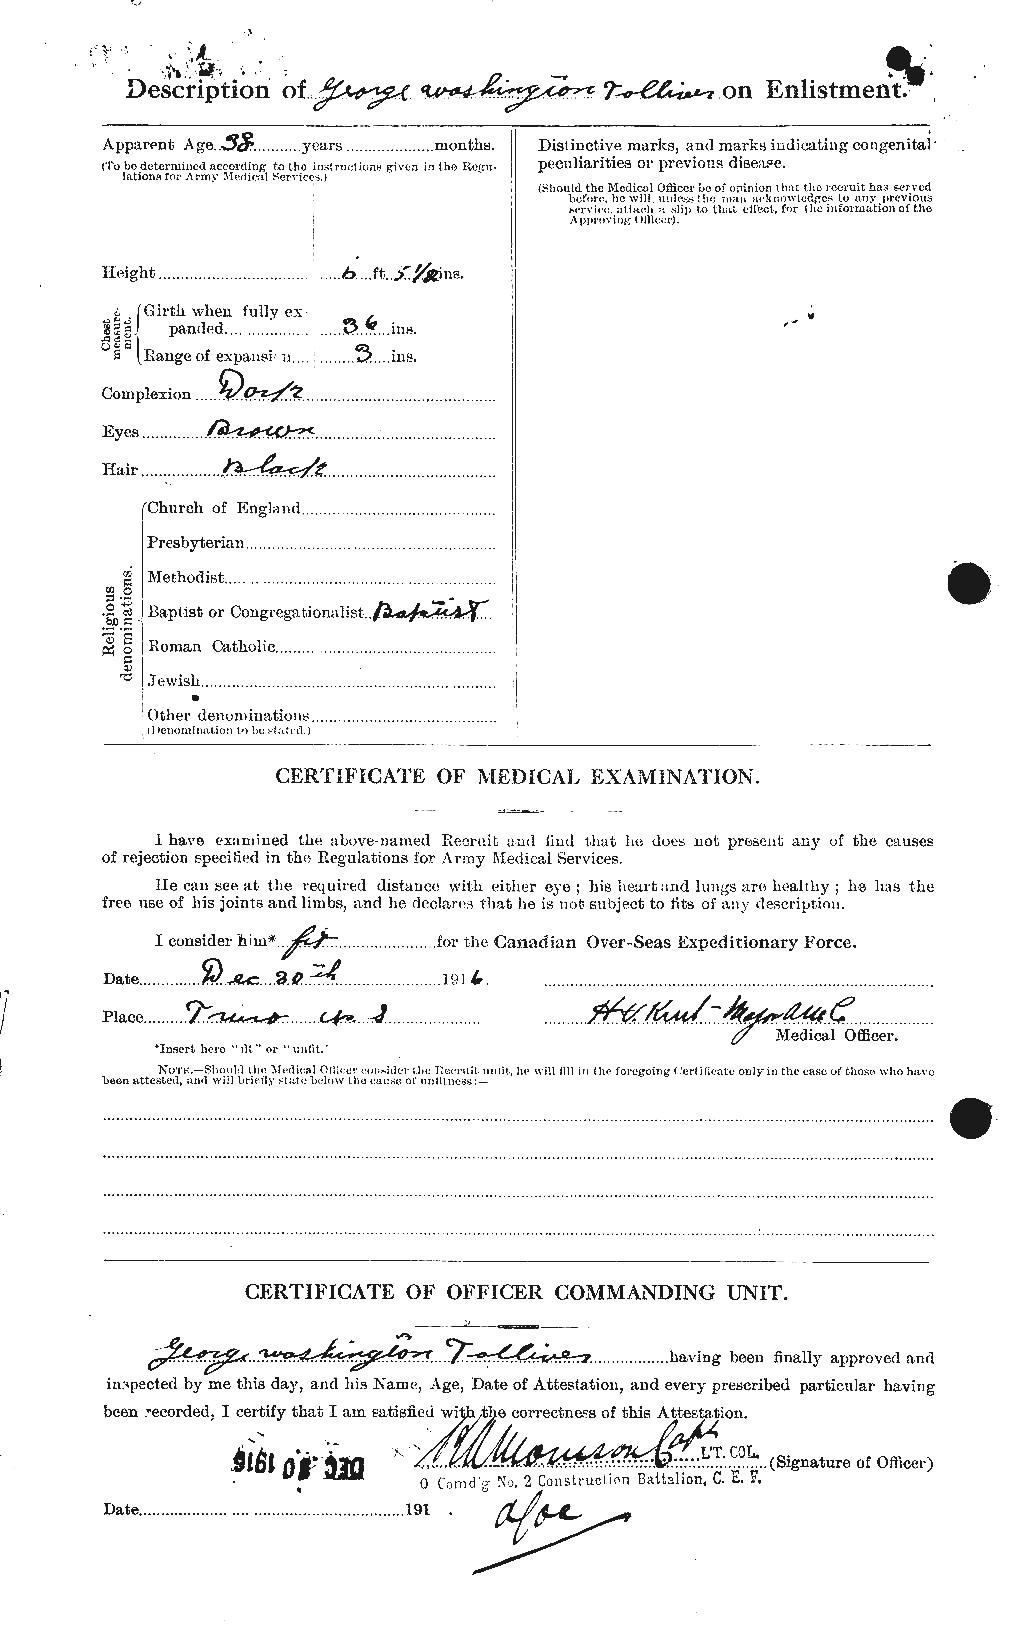 Personnel Records of the First World War - CEF 643049b